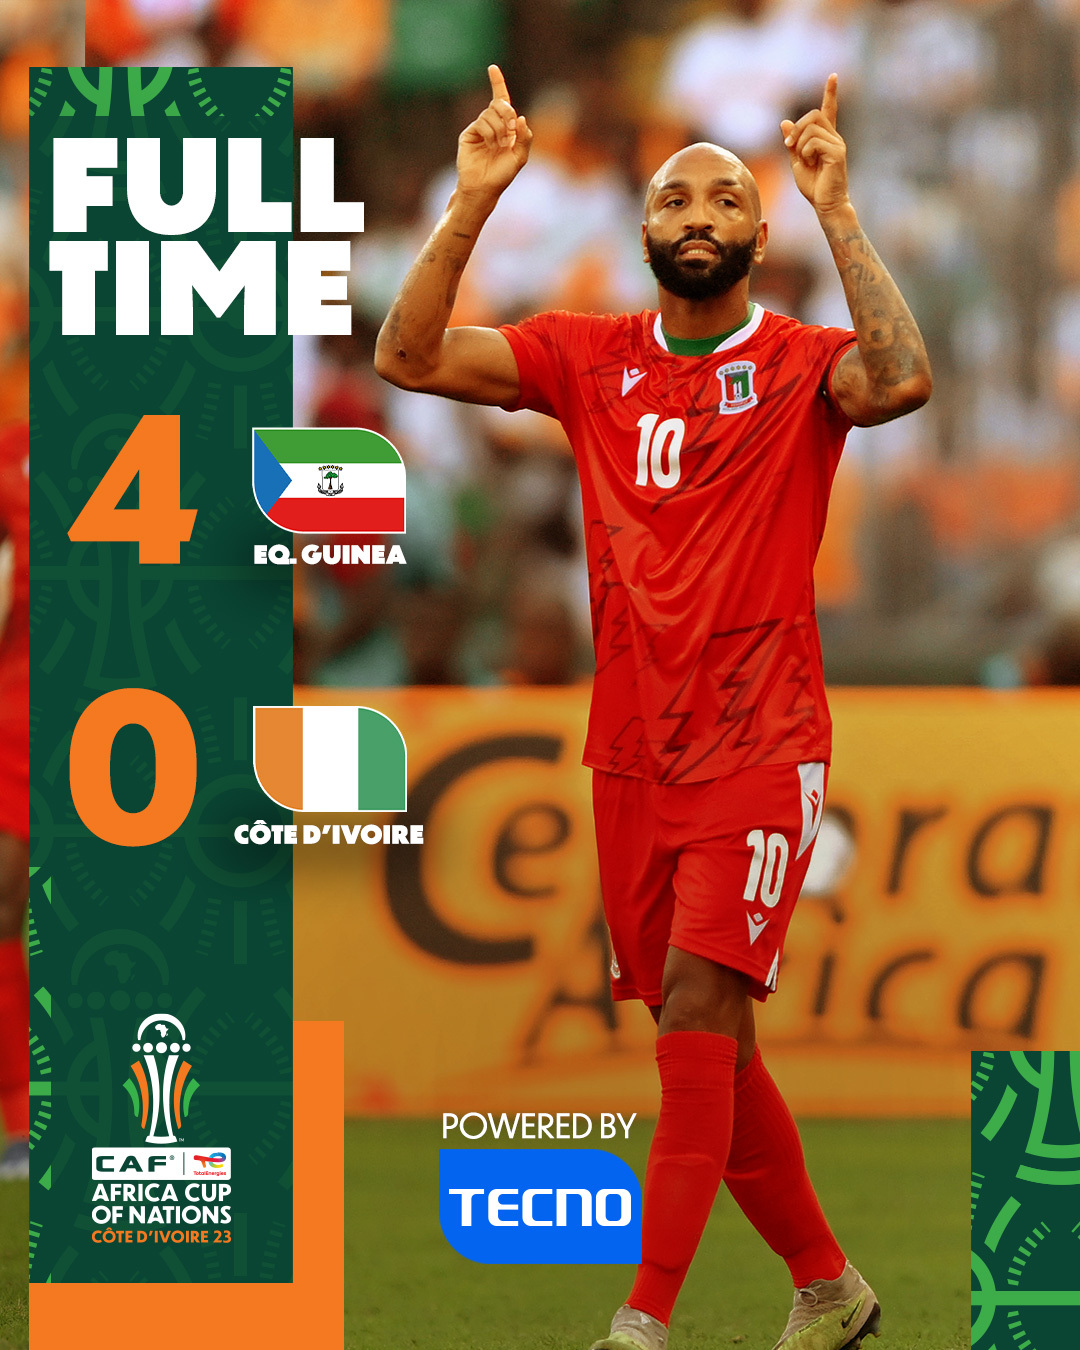 AFCON: Equatorial Guinea knocks out host nation Ivory Coast after 4 - 0 victory